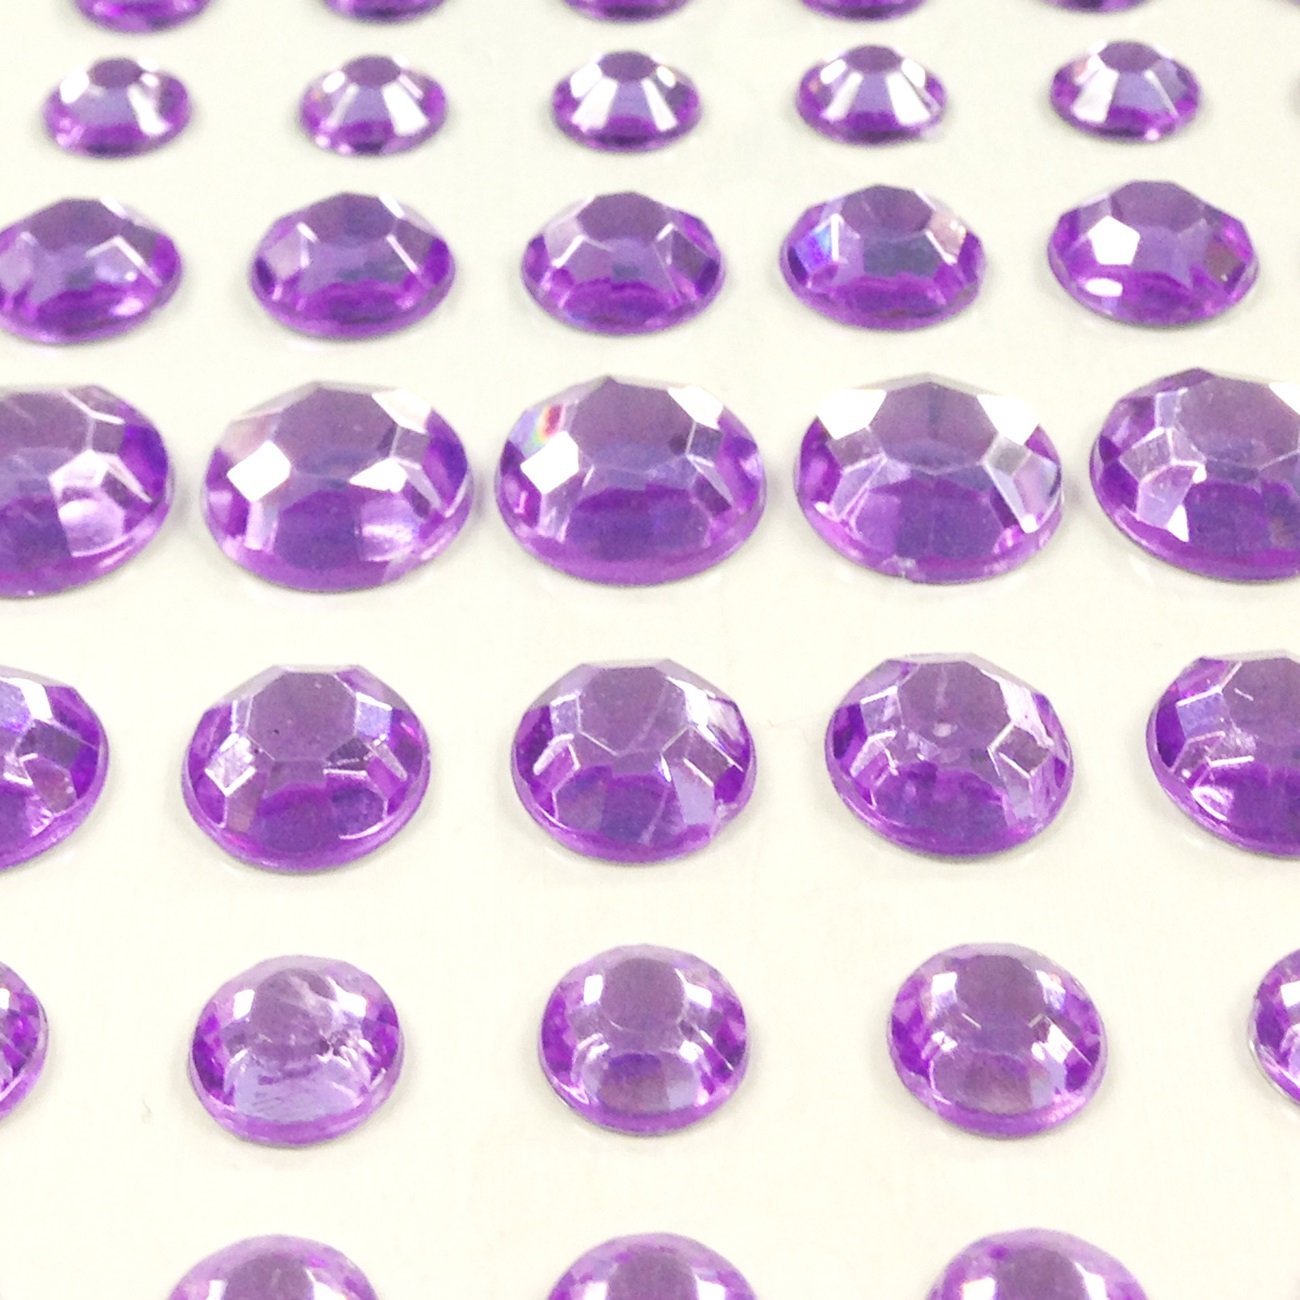 Wrapables 164 pieces Crystal Star and Pearl Stickers Adhesive Rhinestones,  Purple